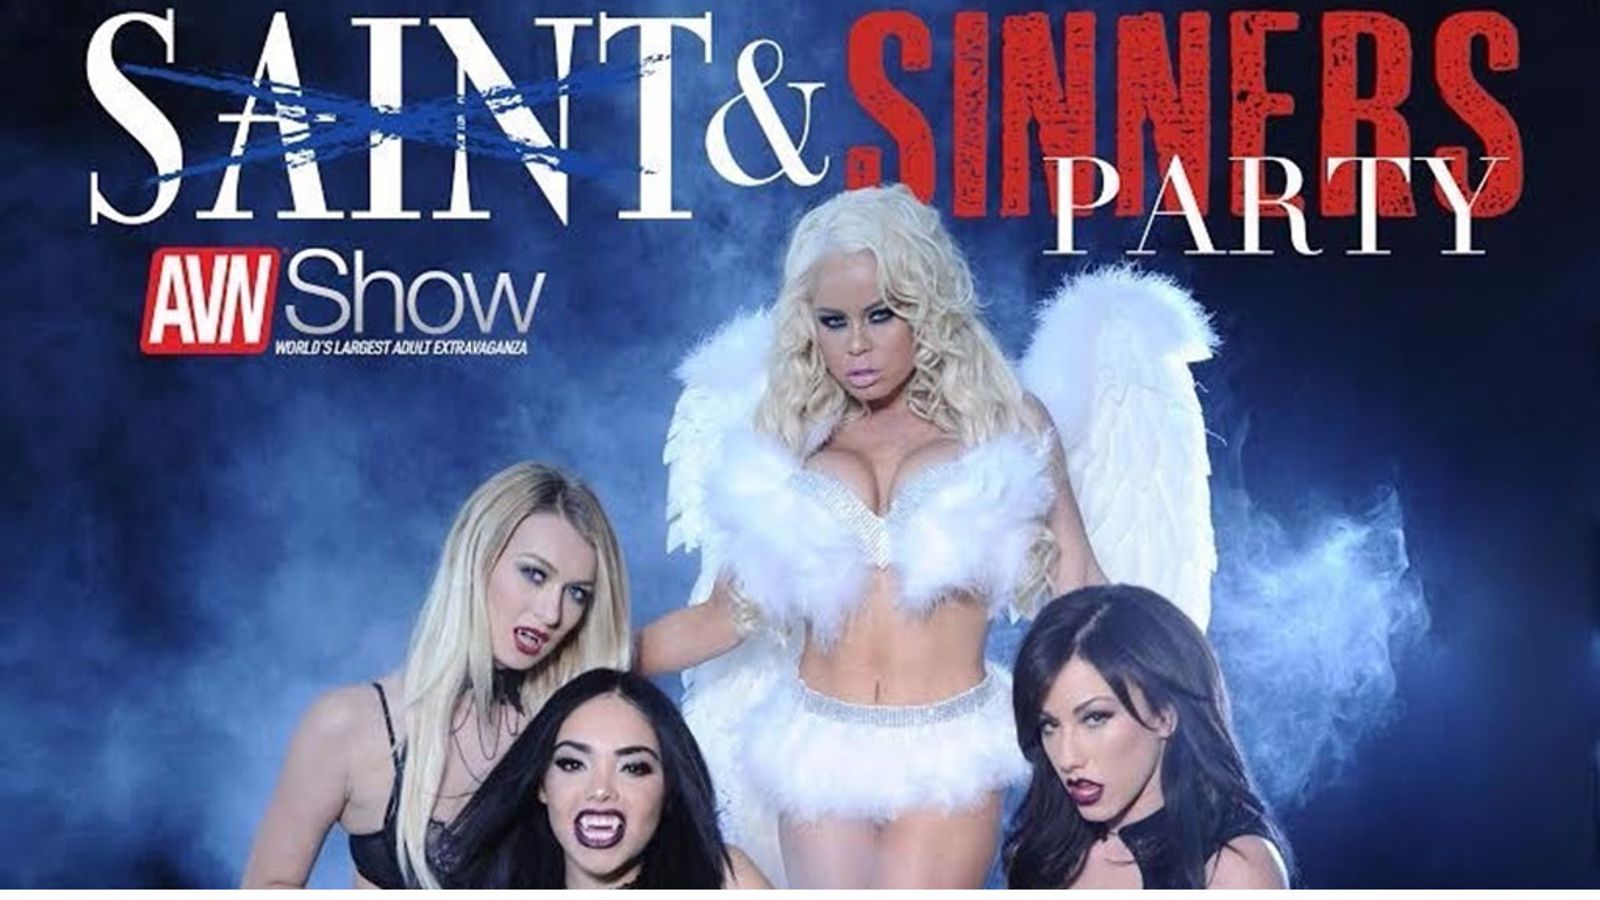 Adult Stars to Gather at L.A. Direct Models’ ‘Saints & Sinners’ Party